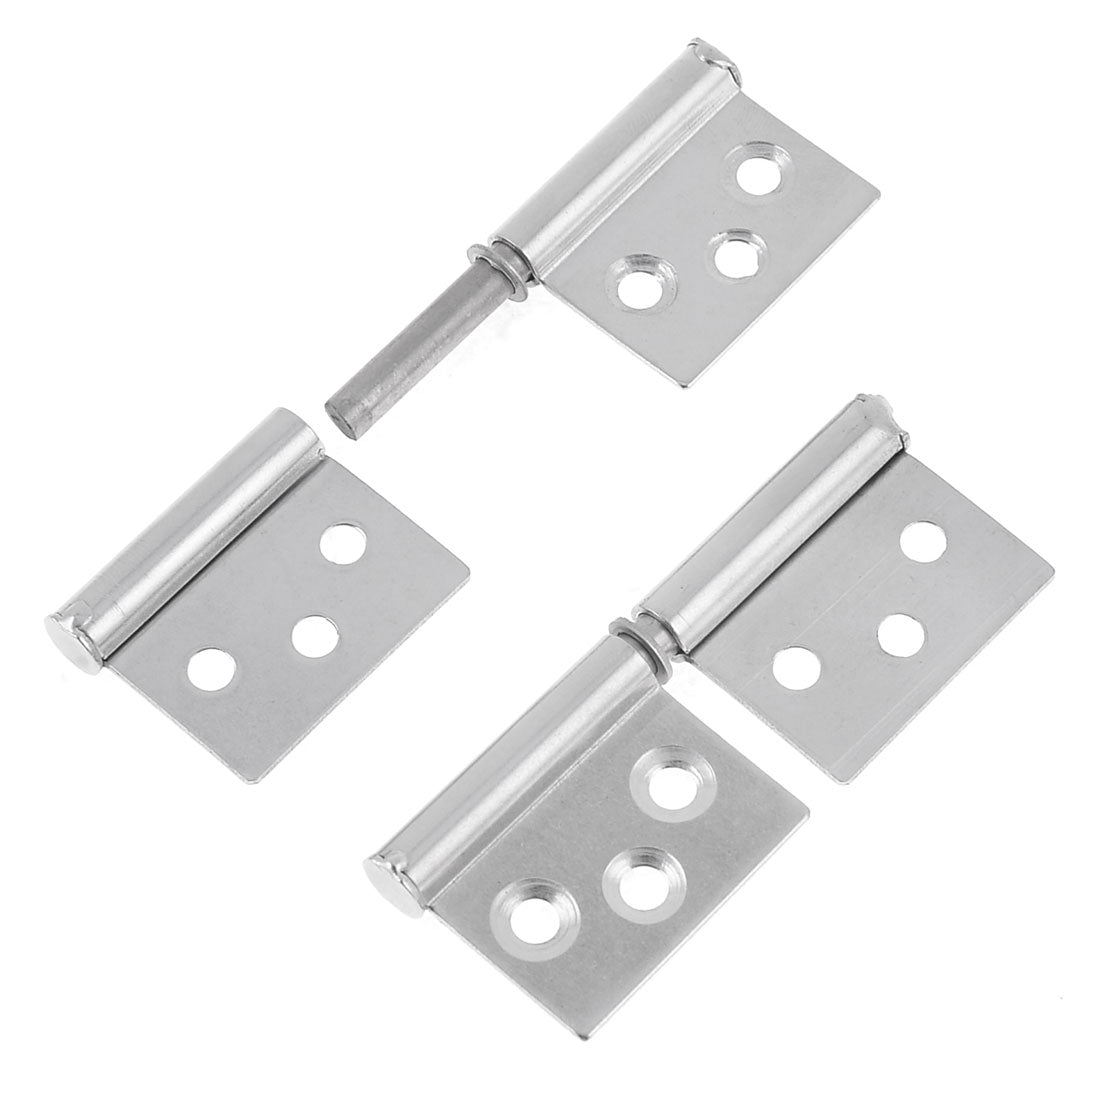 uxcell Uxcell 2 Pcs Stainless Steel Flag Type Window Door Cabinet Hinges 3.1" Length